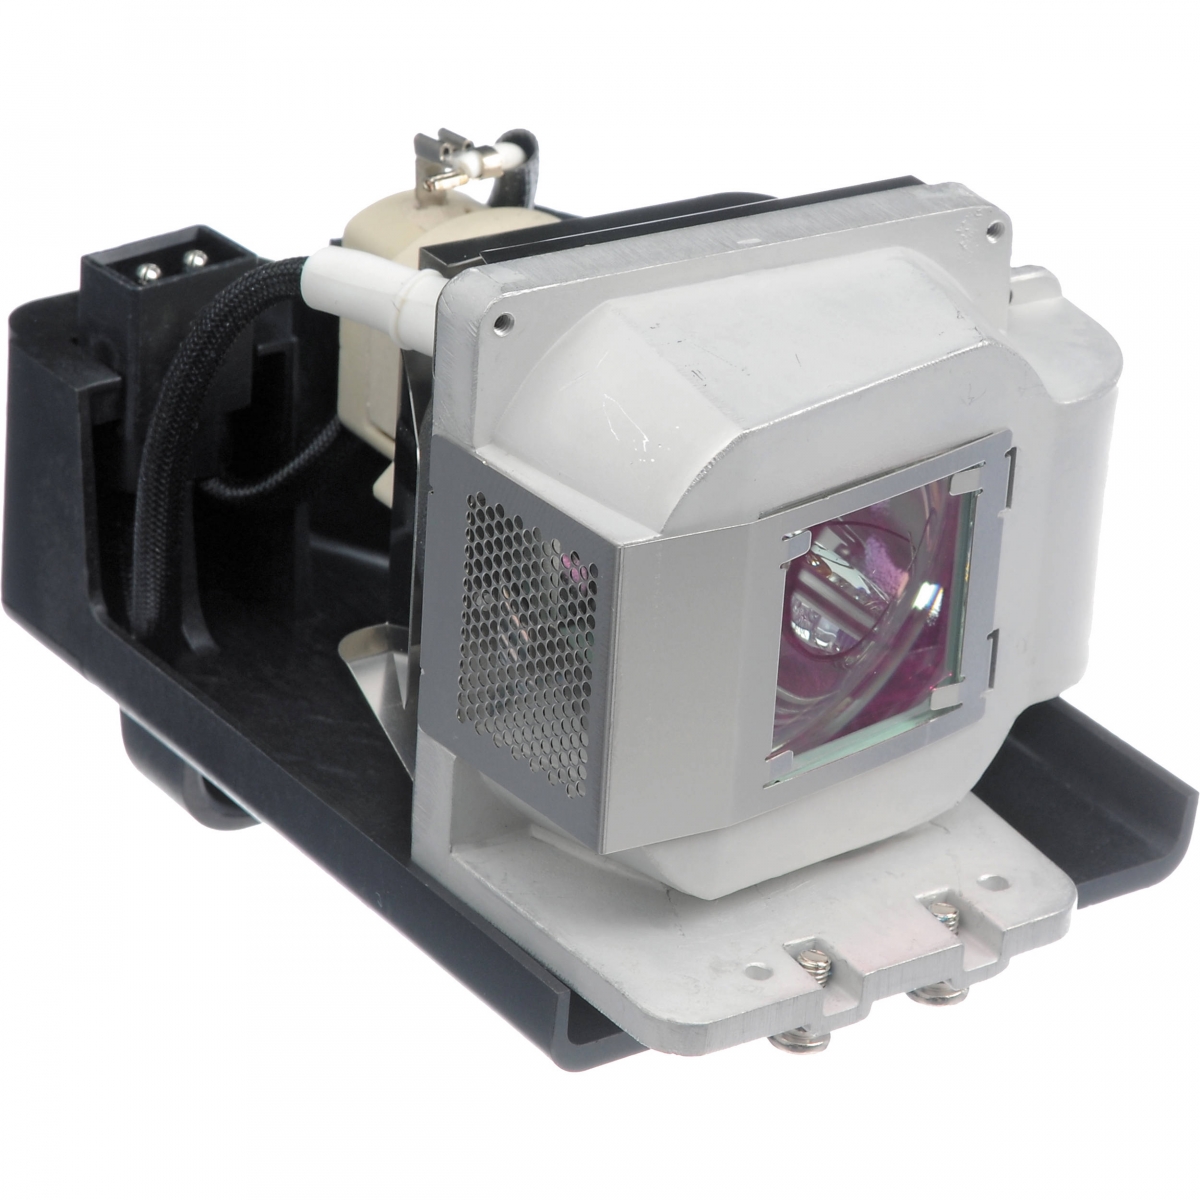 Compatible Projector lamp for SANYO 610-337-1764